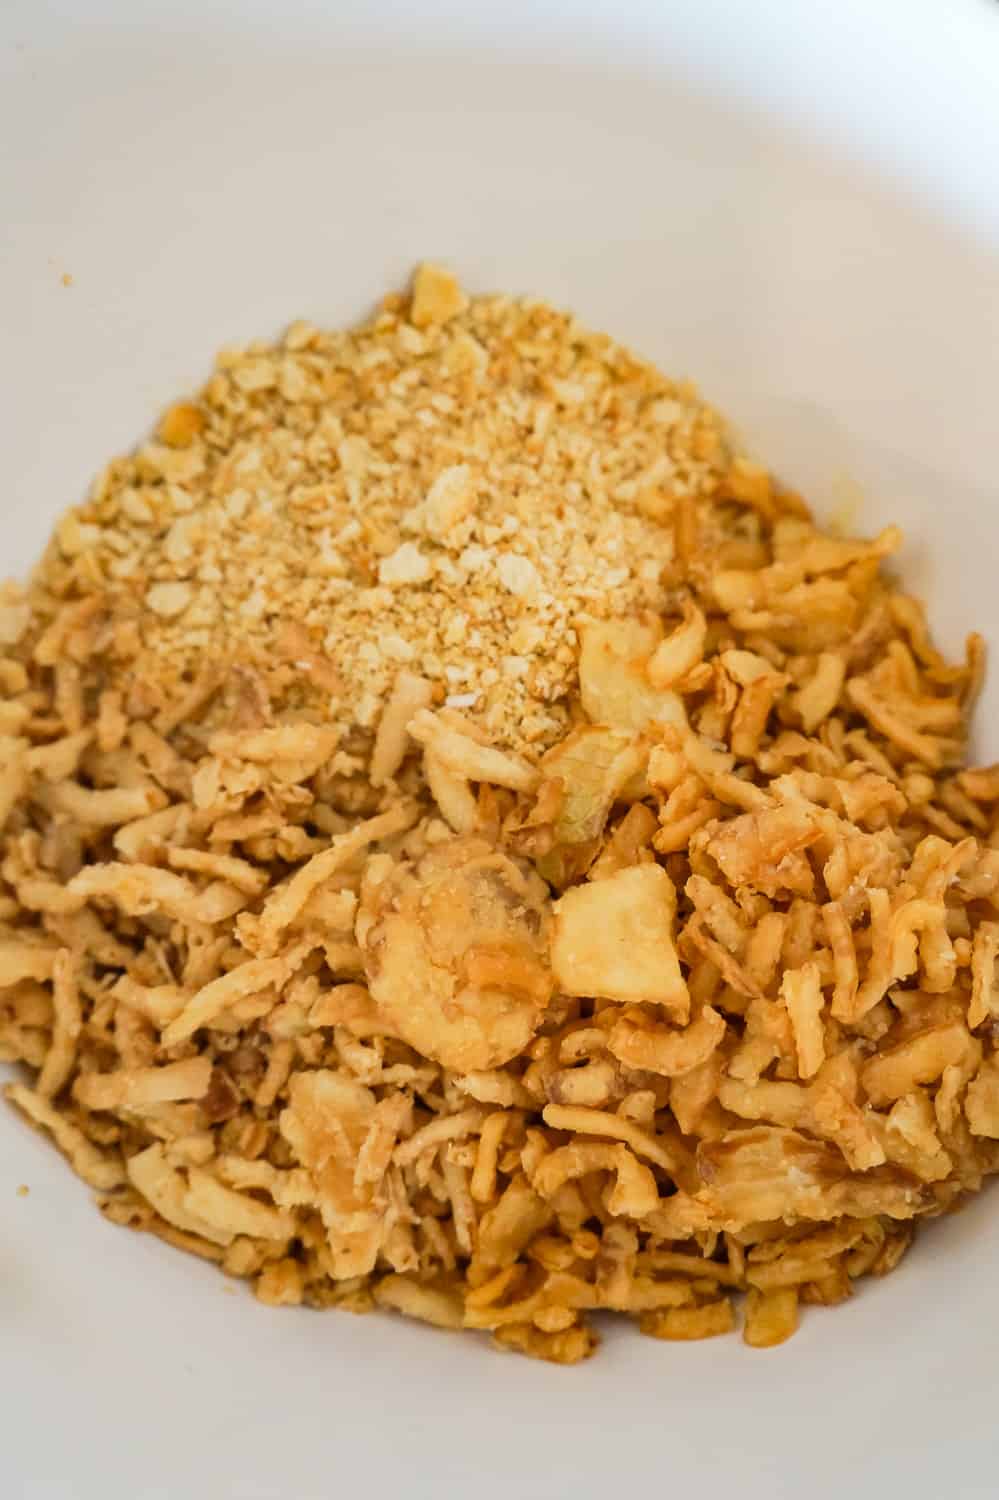 Ritz cracker crumbs and French's fried onions in a mixing bowl.